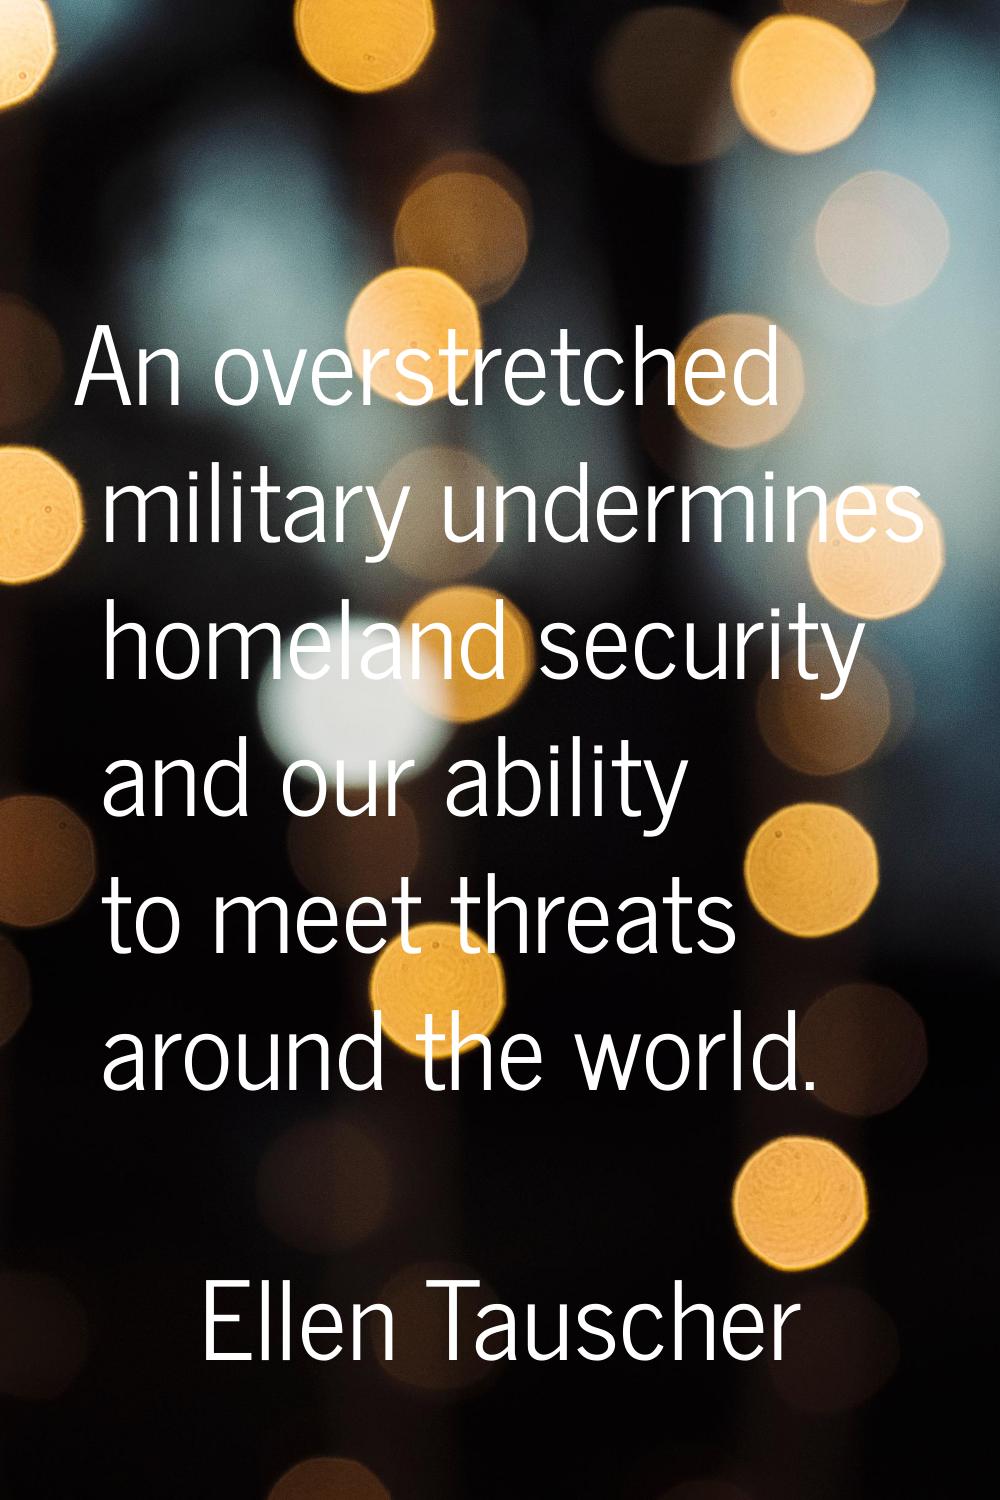 An overstretched military undermines homeland security and our ability to meet threats around the w